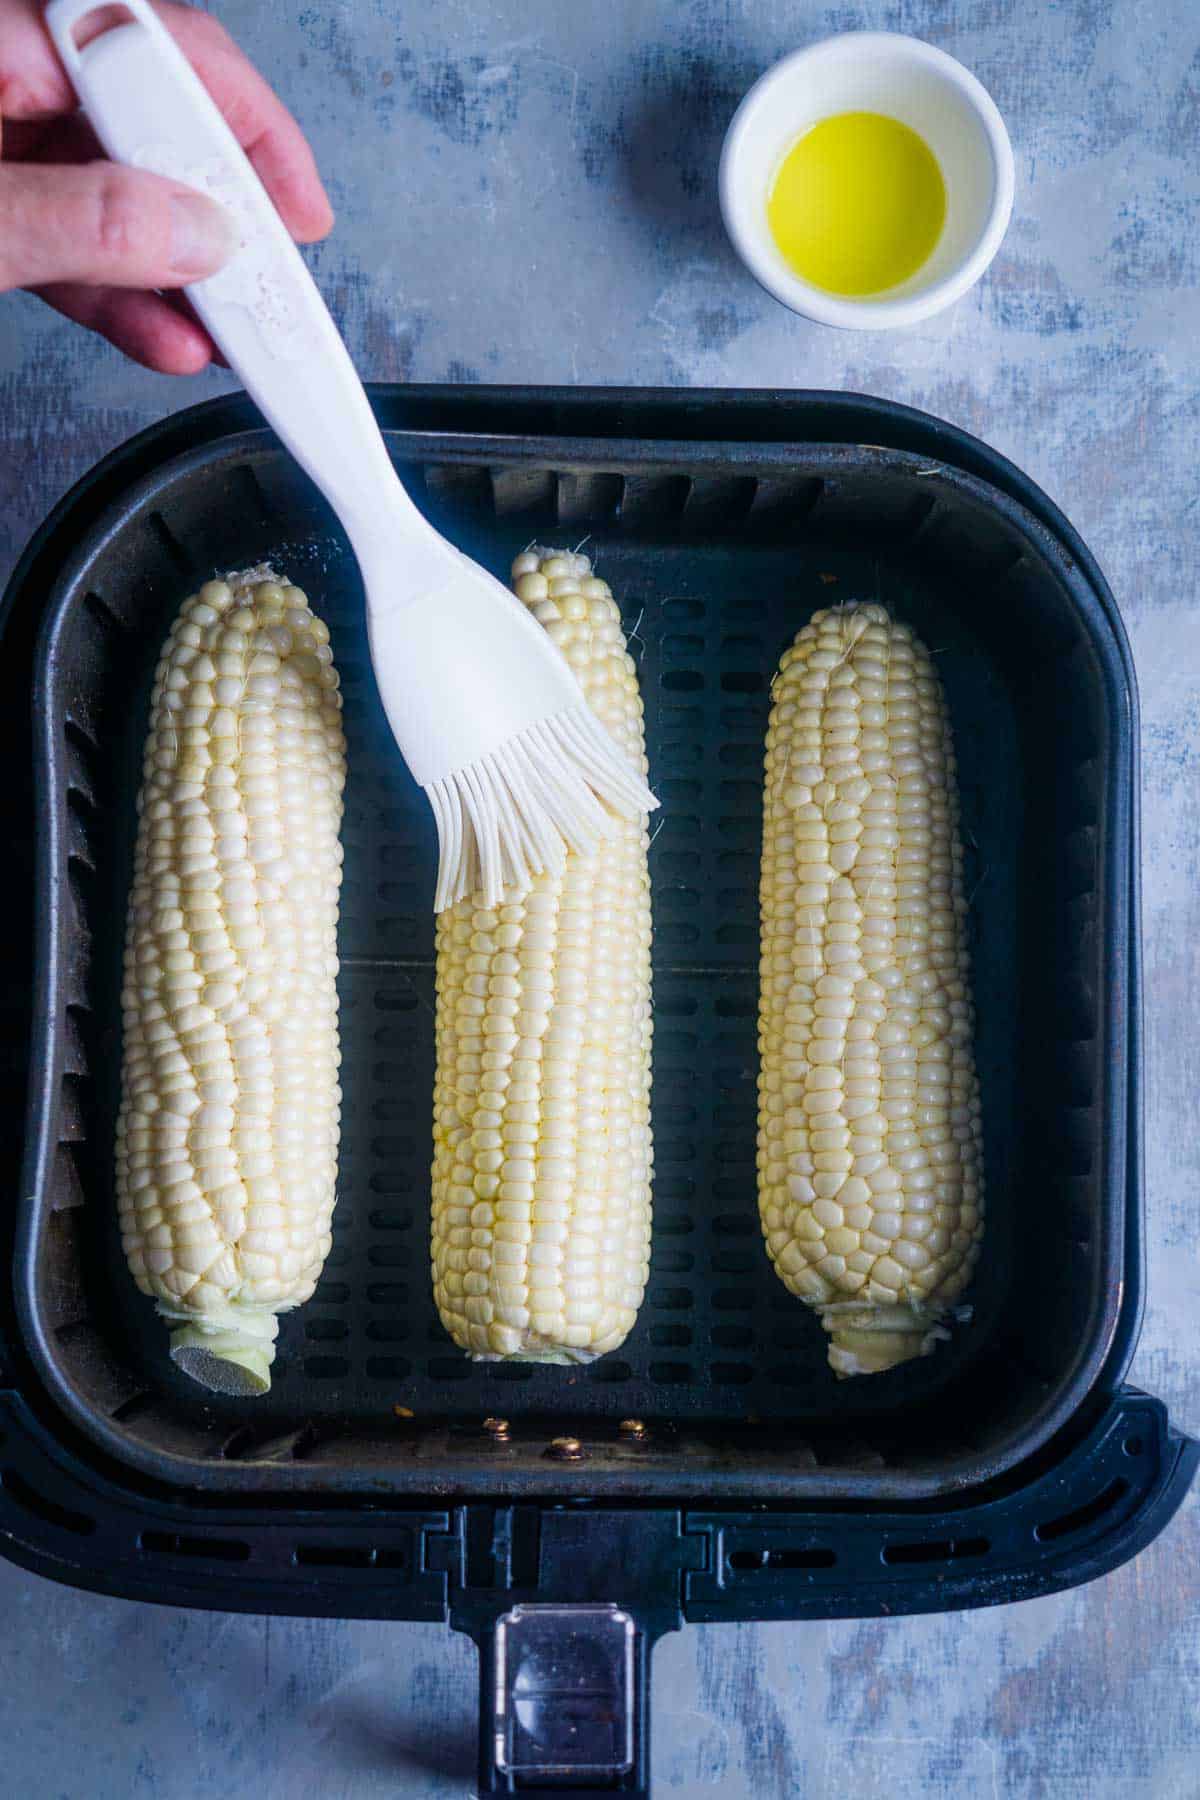 corn on the cob in air fryer basket is brushed with oil